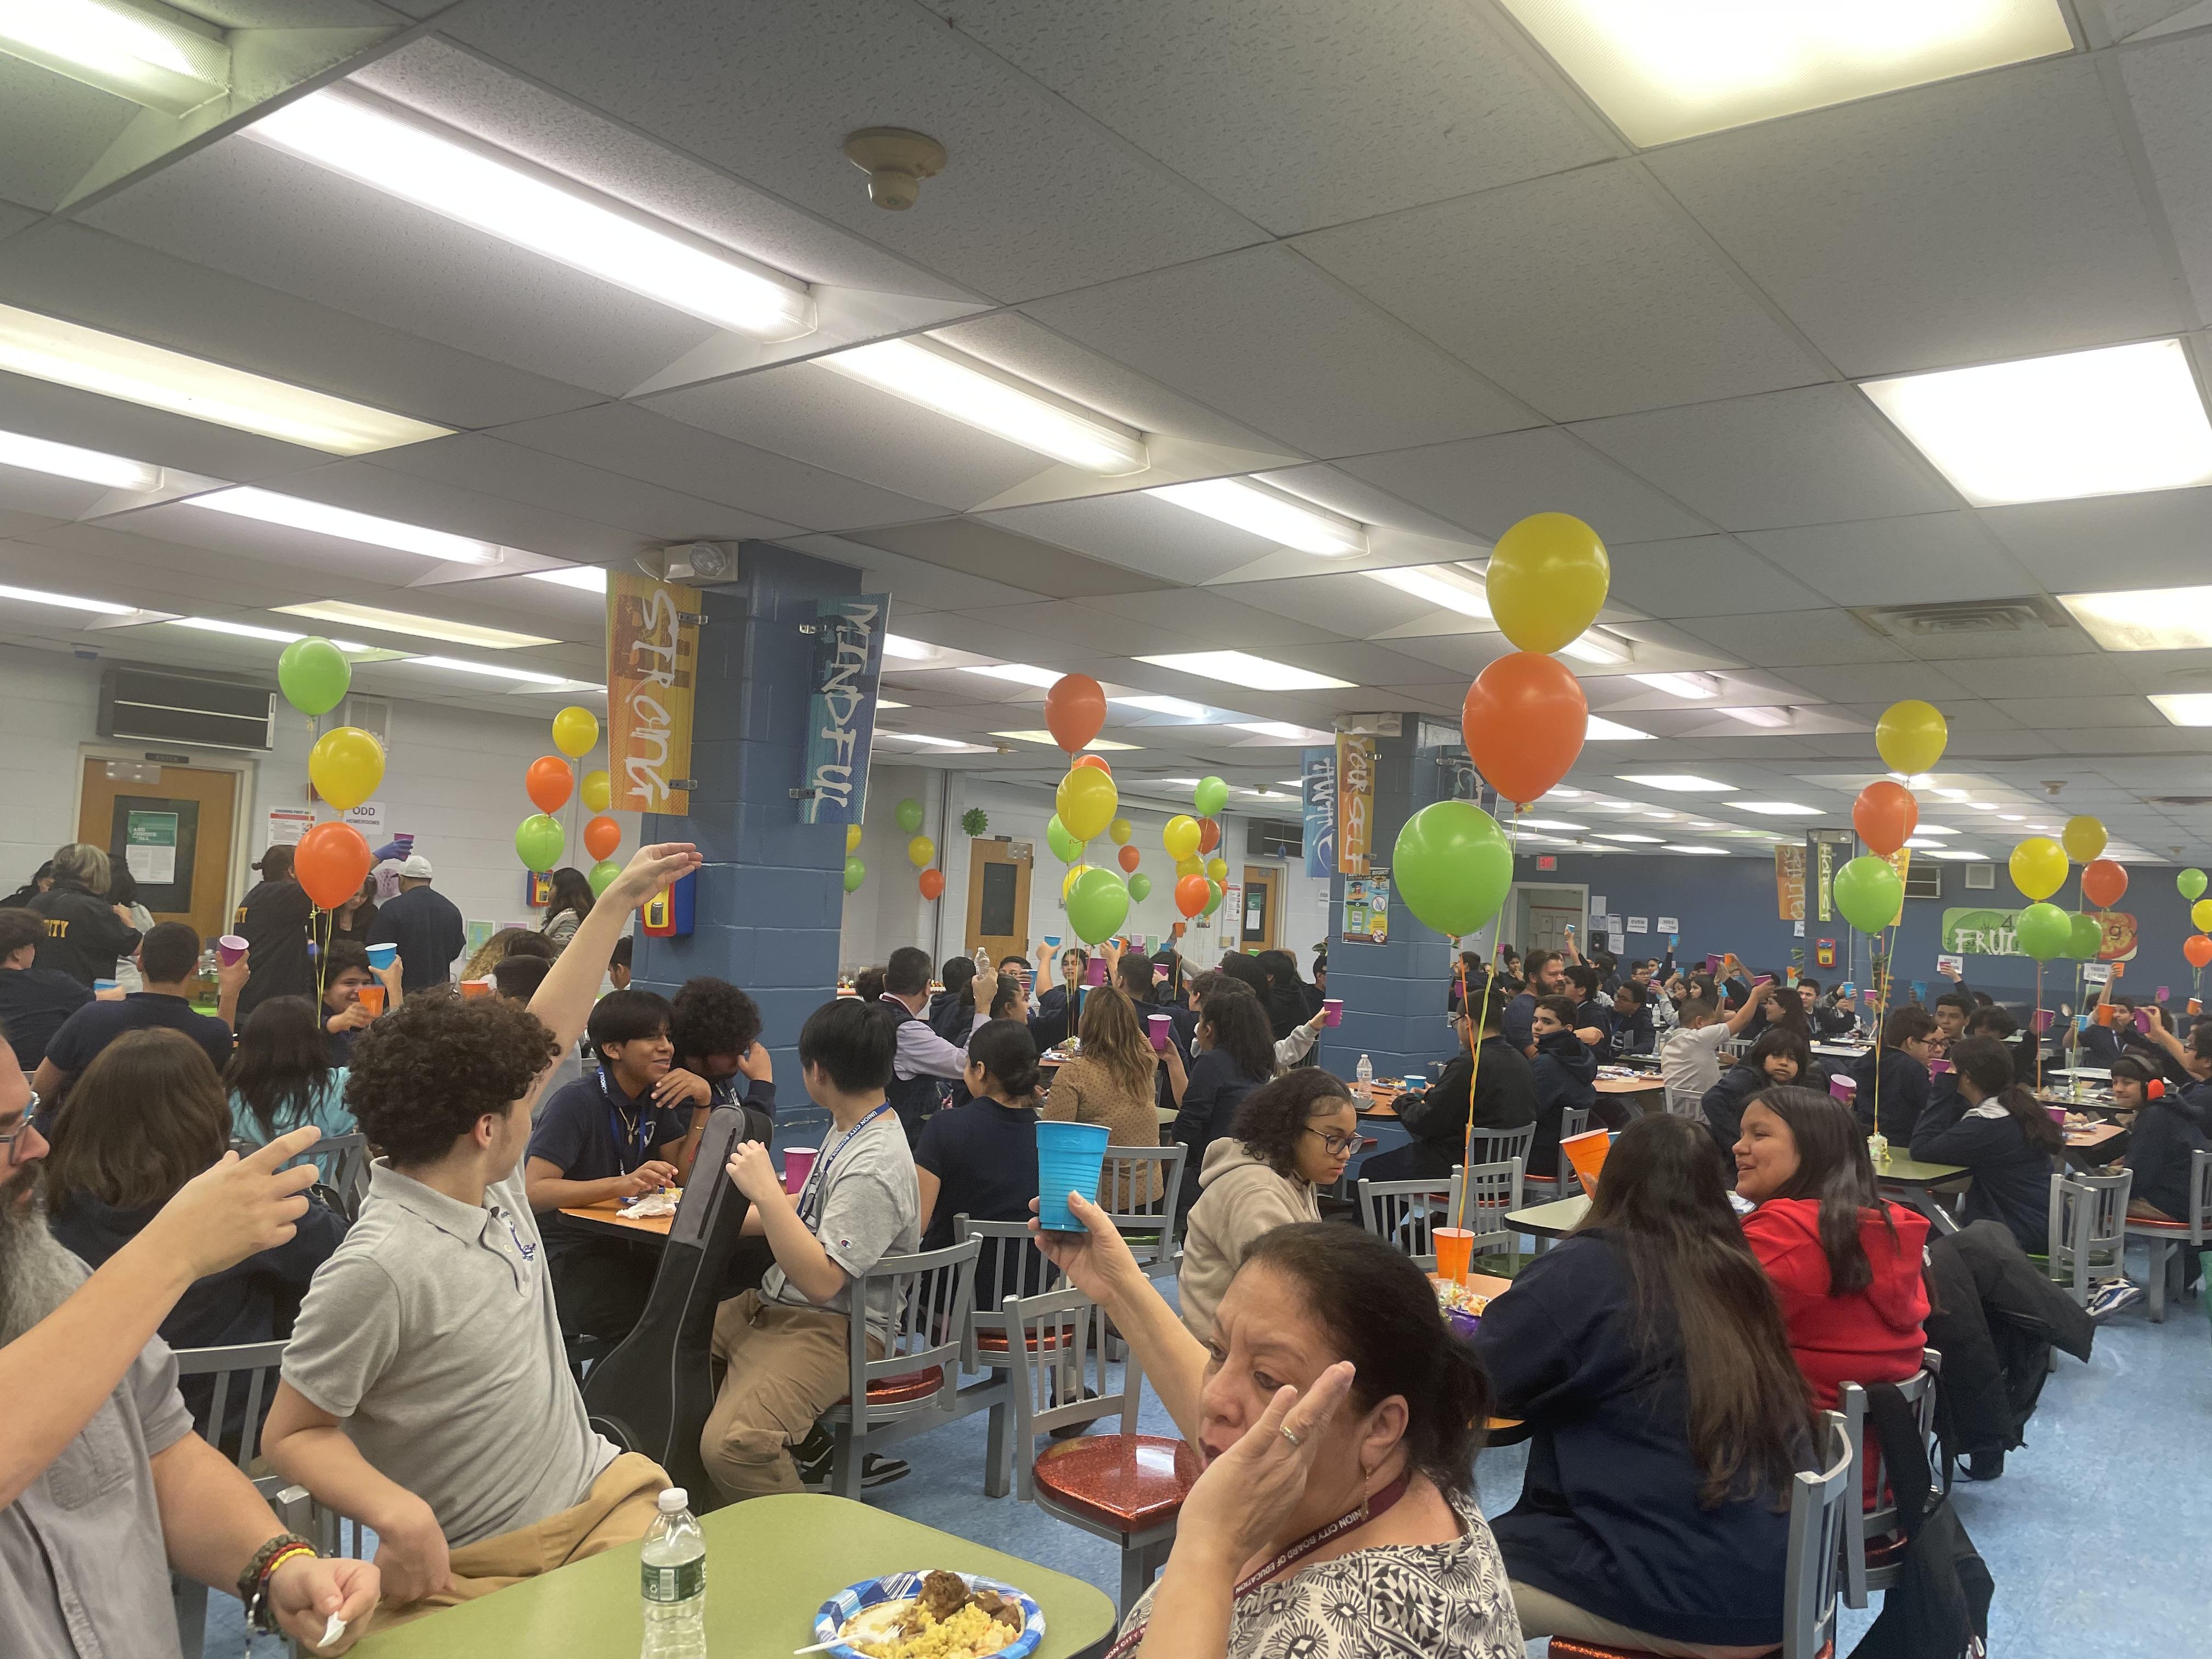 Thanksgiving Dinner at the Union Hill Middle School